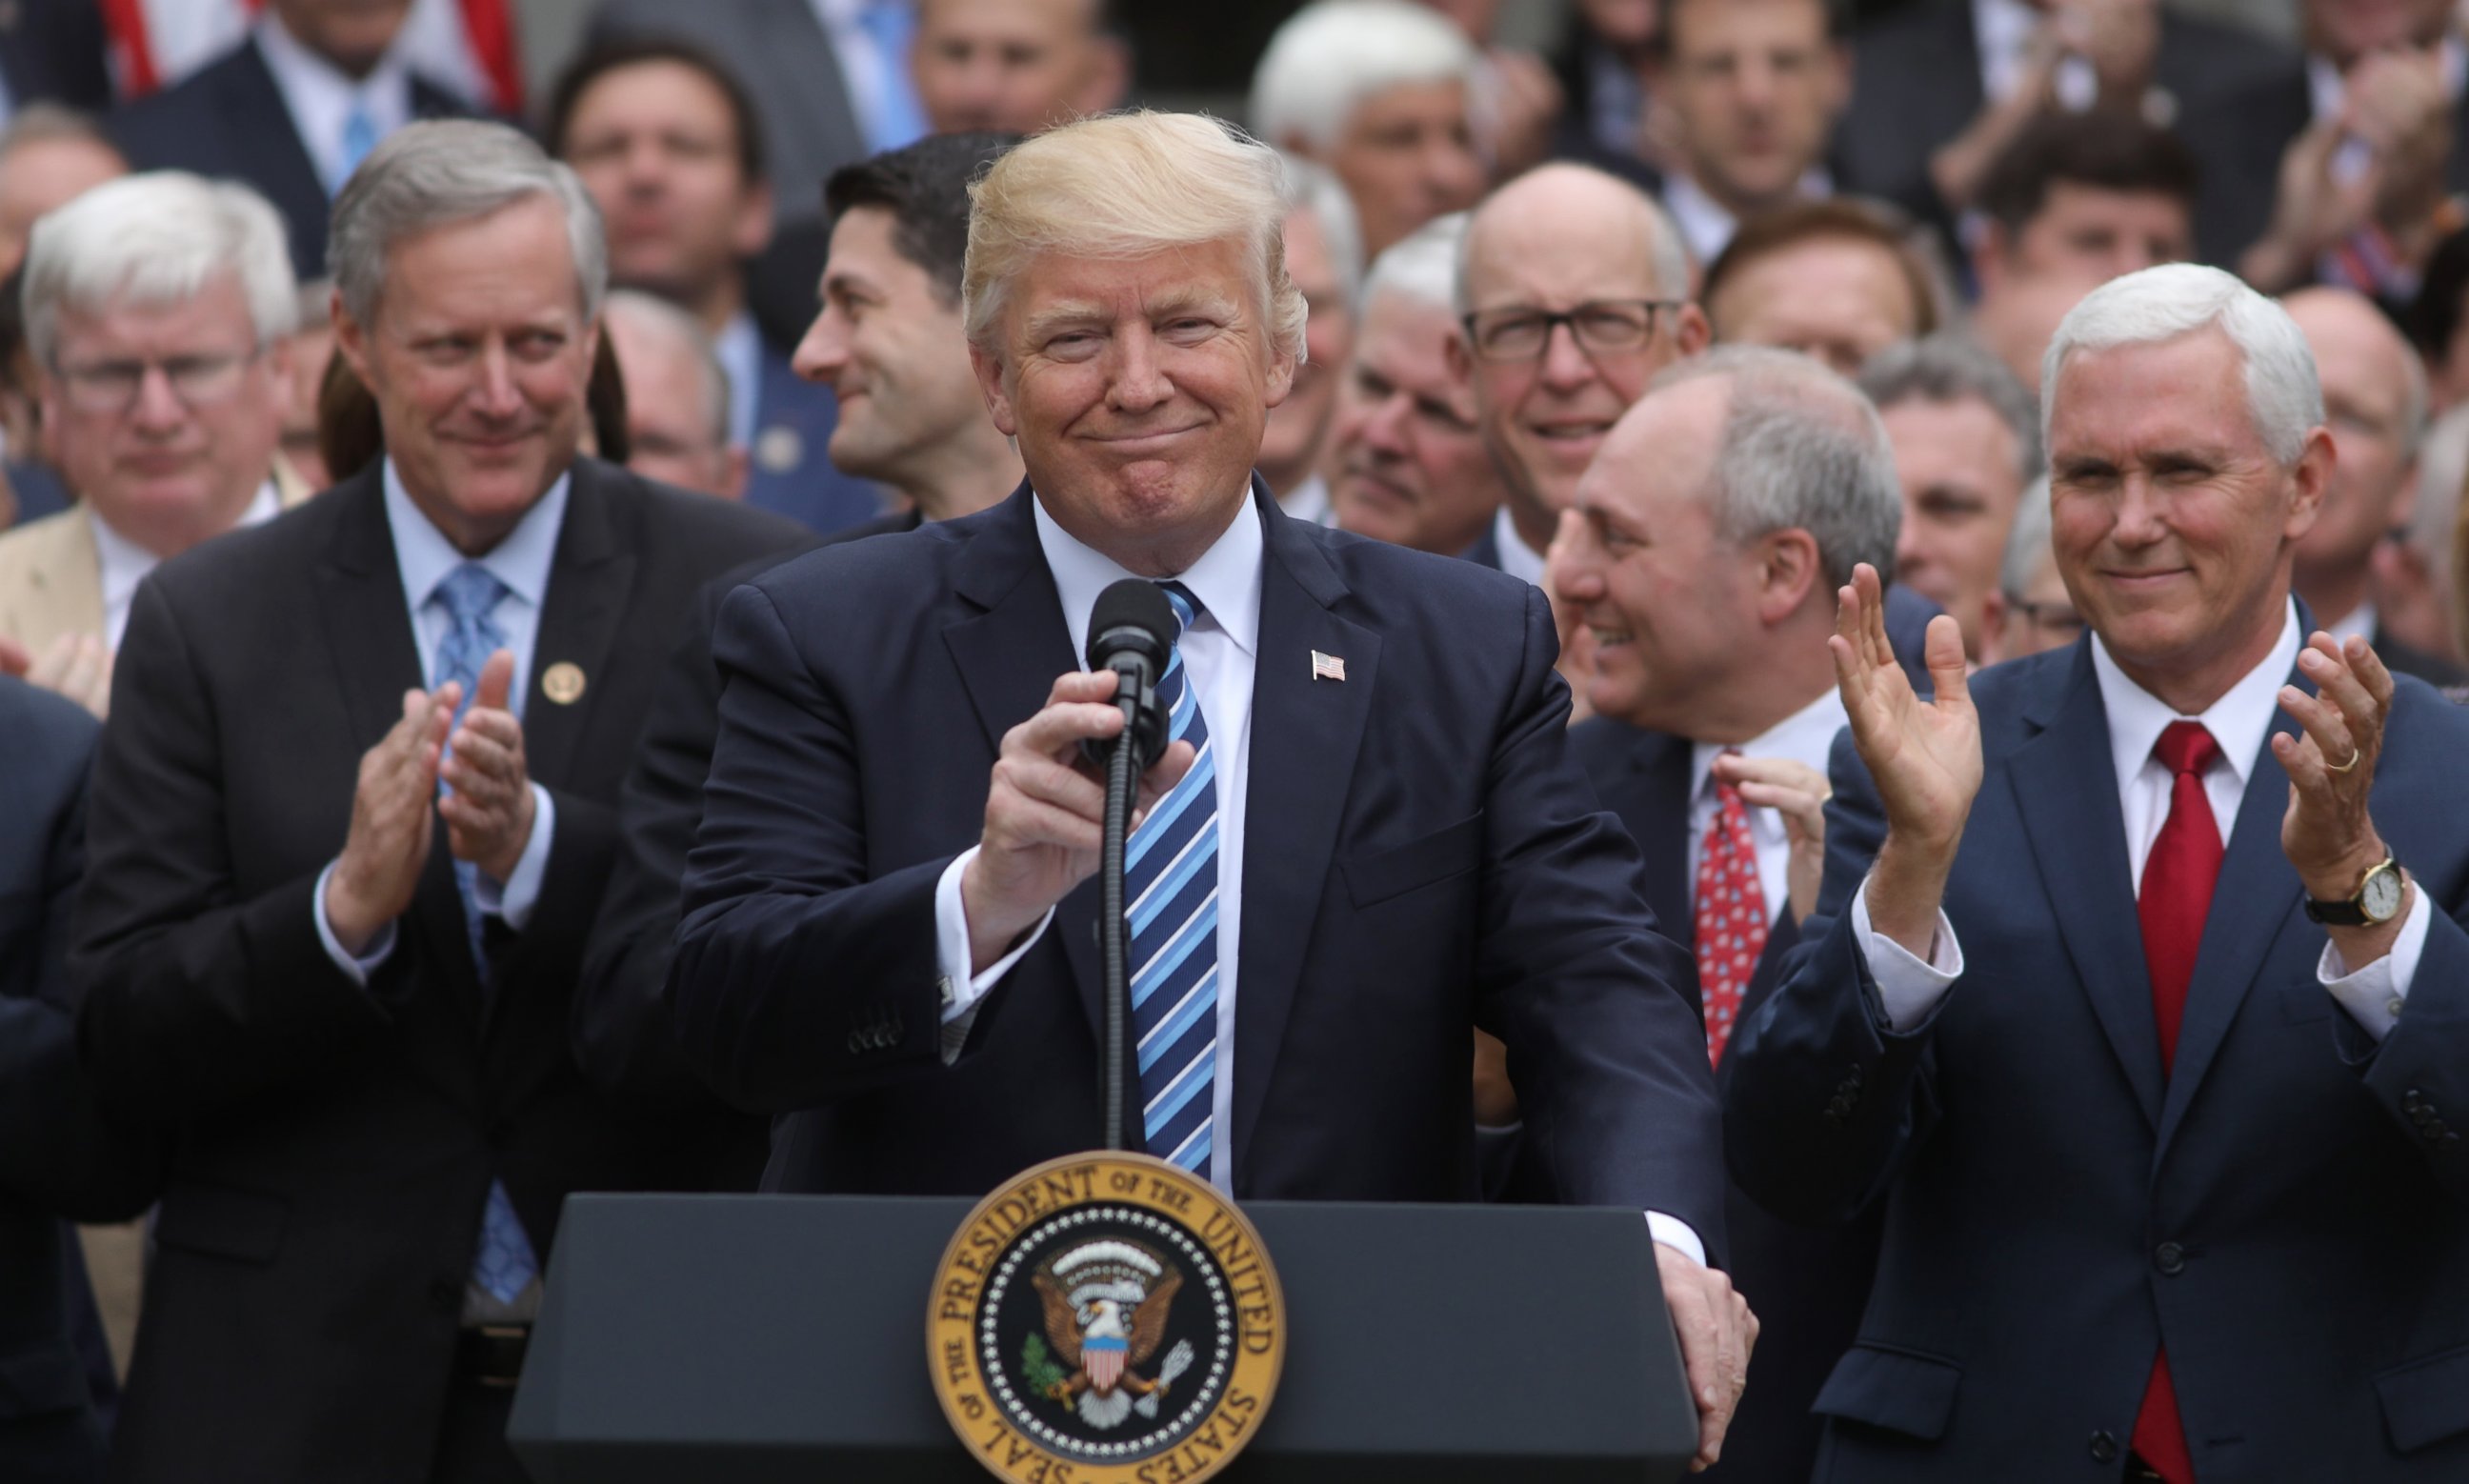 PHOTO: President Donald Trump gathers with Vice President Mike Pence, right, and Congressional Republicans in the Rose Garden of the White House after the House of Representatives approved the American Healthcare Act, May 4, 2017. 